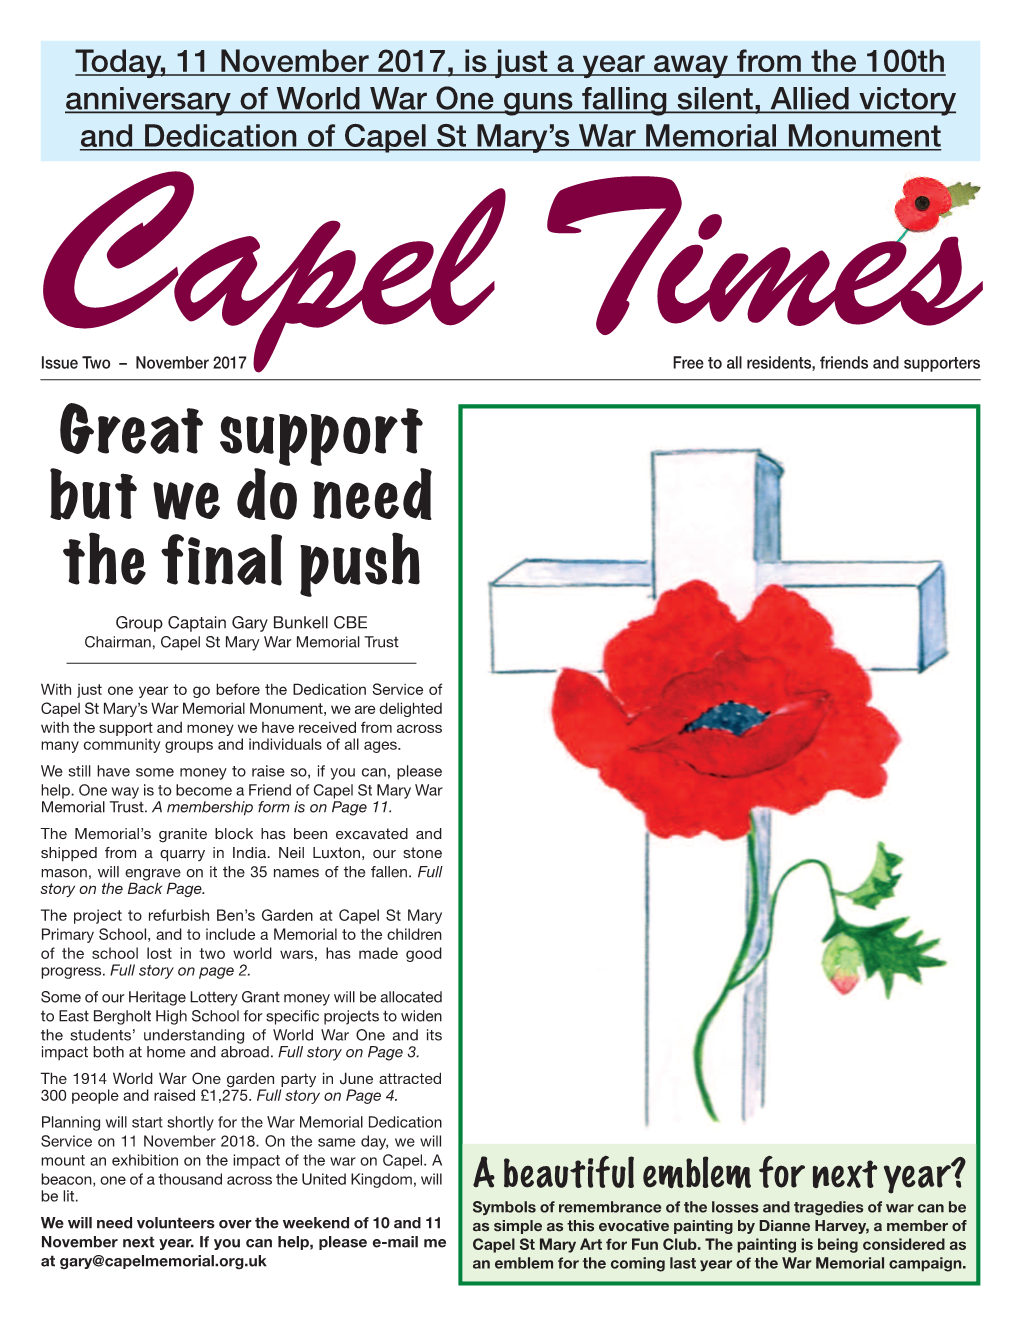 Great Support but We Do Need the Final Push Group Captain Gary Bunkell CBE Chairman, Capel St Mary War Memorial Trust